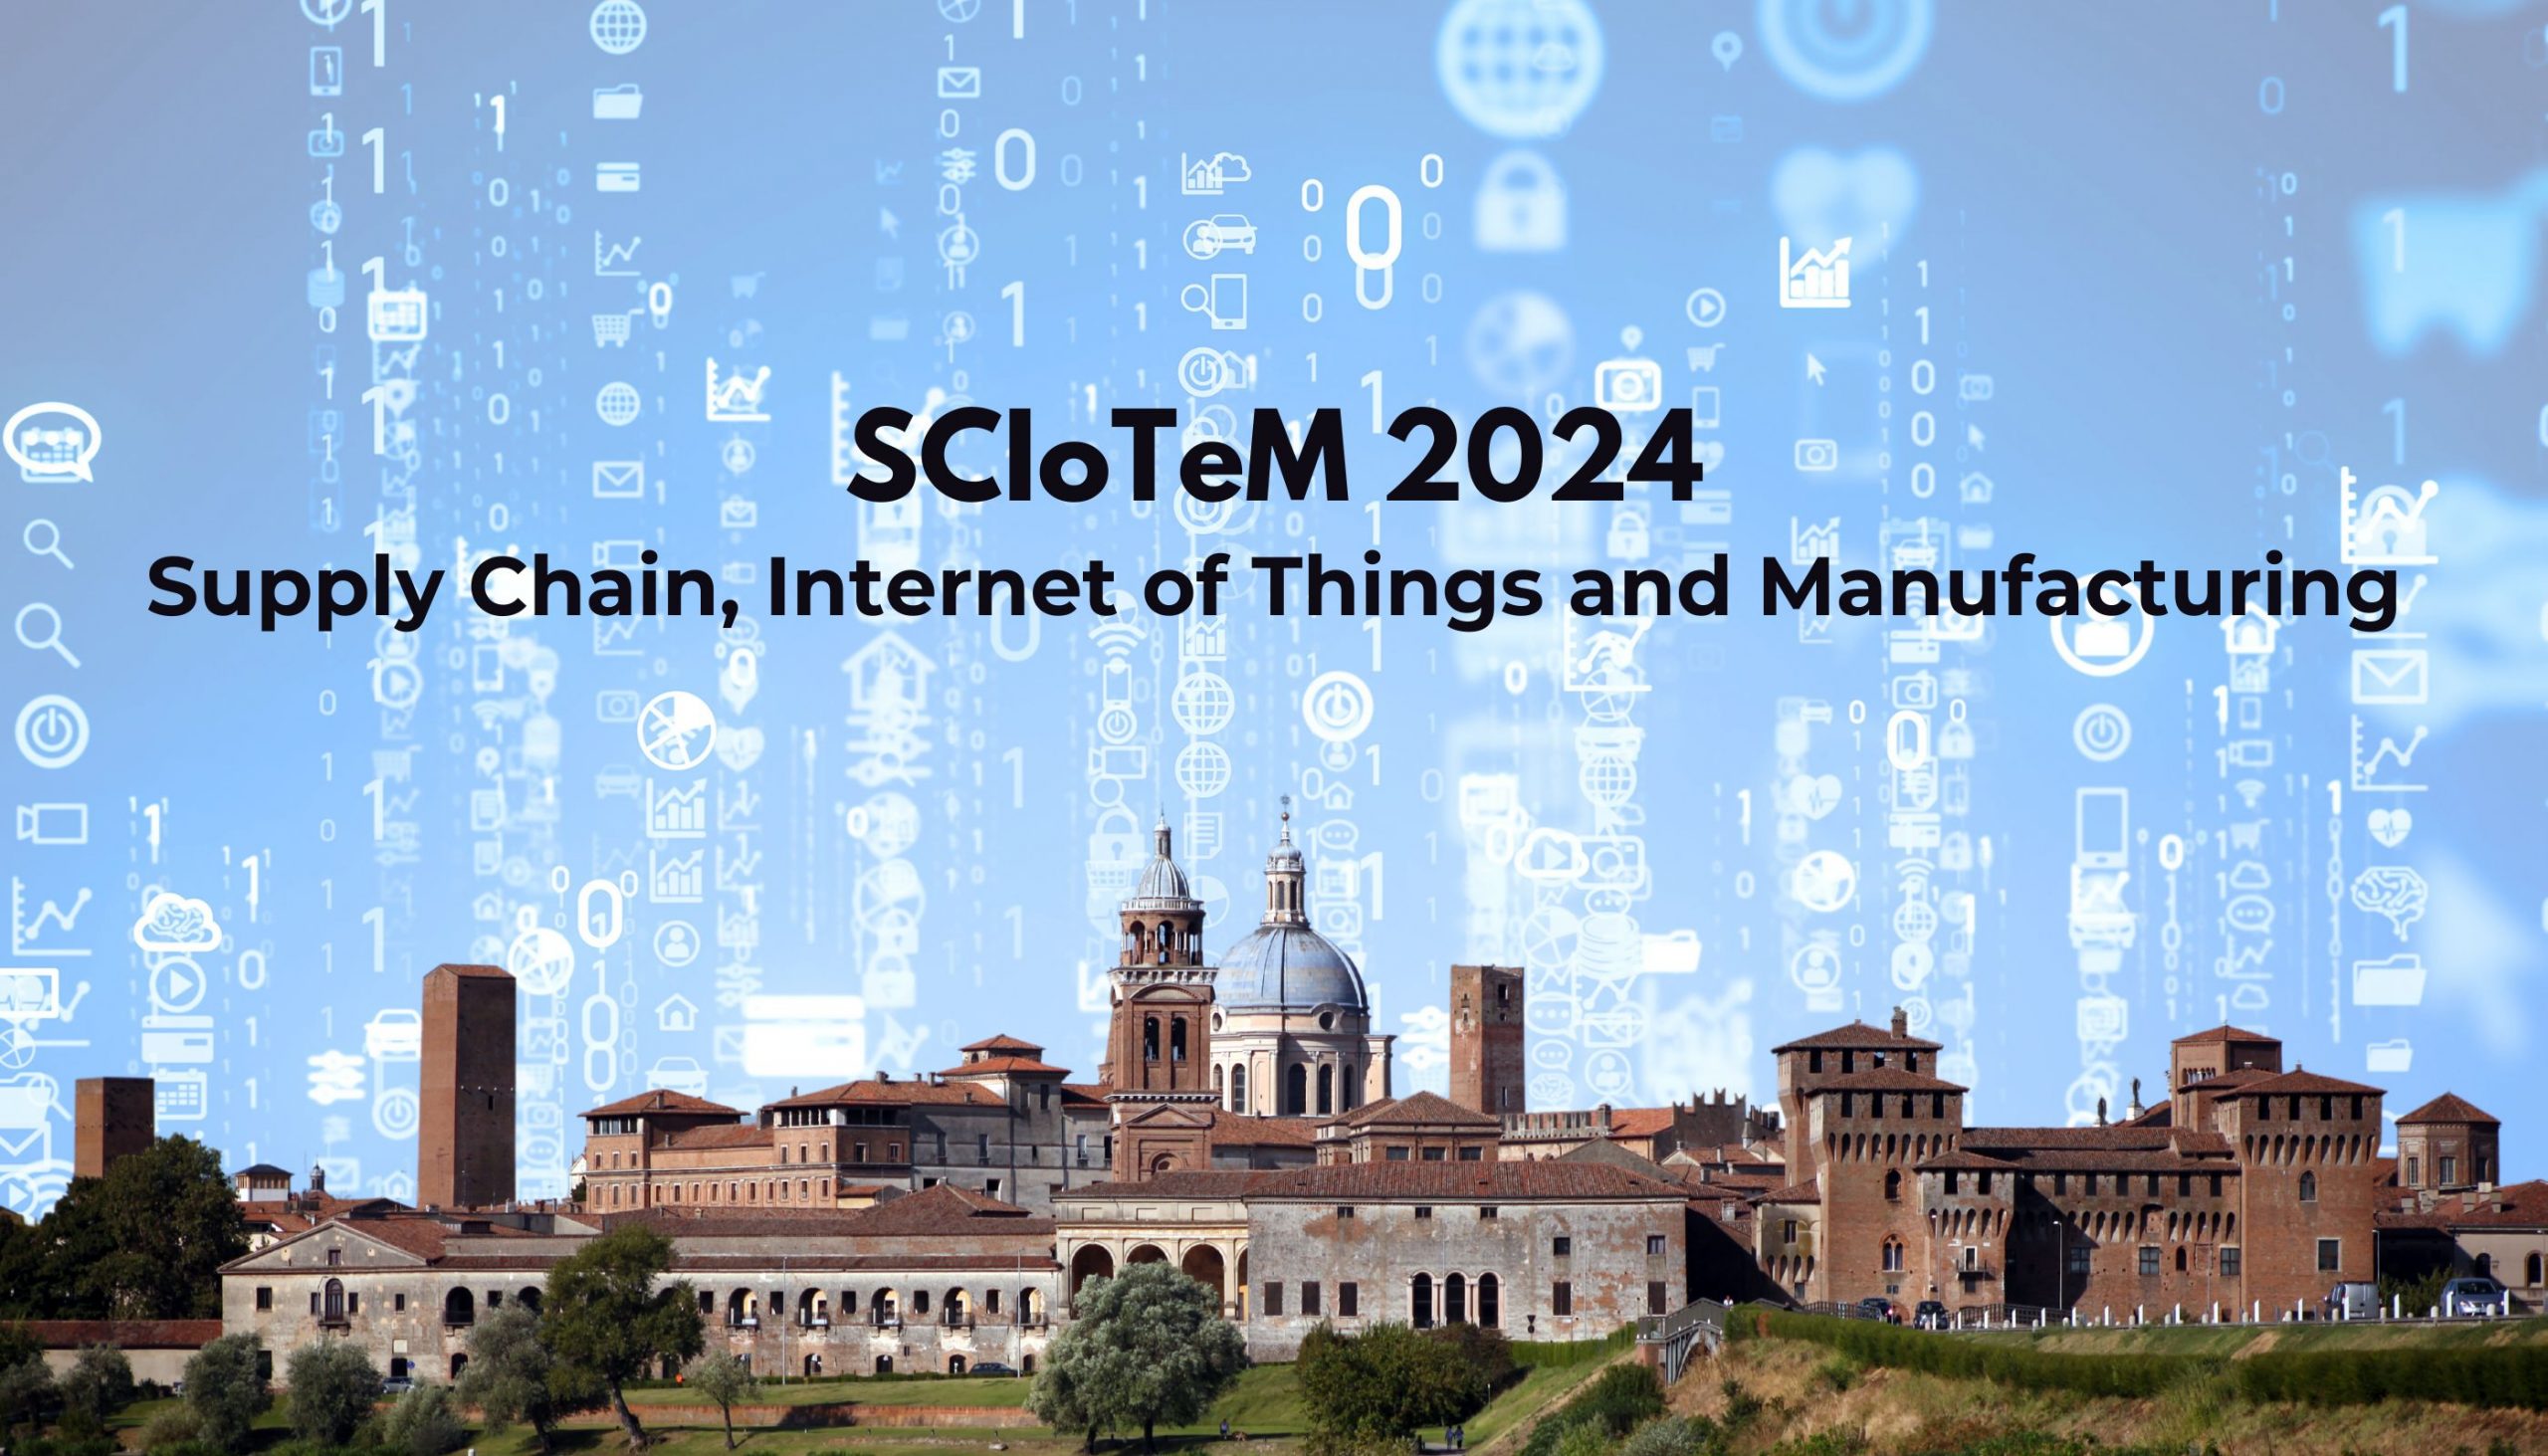 SCIoTeM 2024 -SCIoTeM 2024 Supply Chain, Internet of Things and Manufacturing